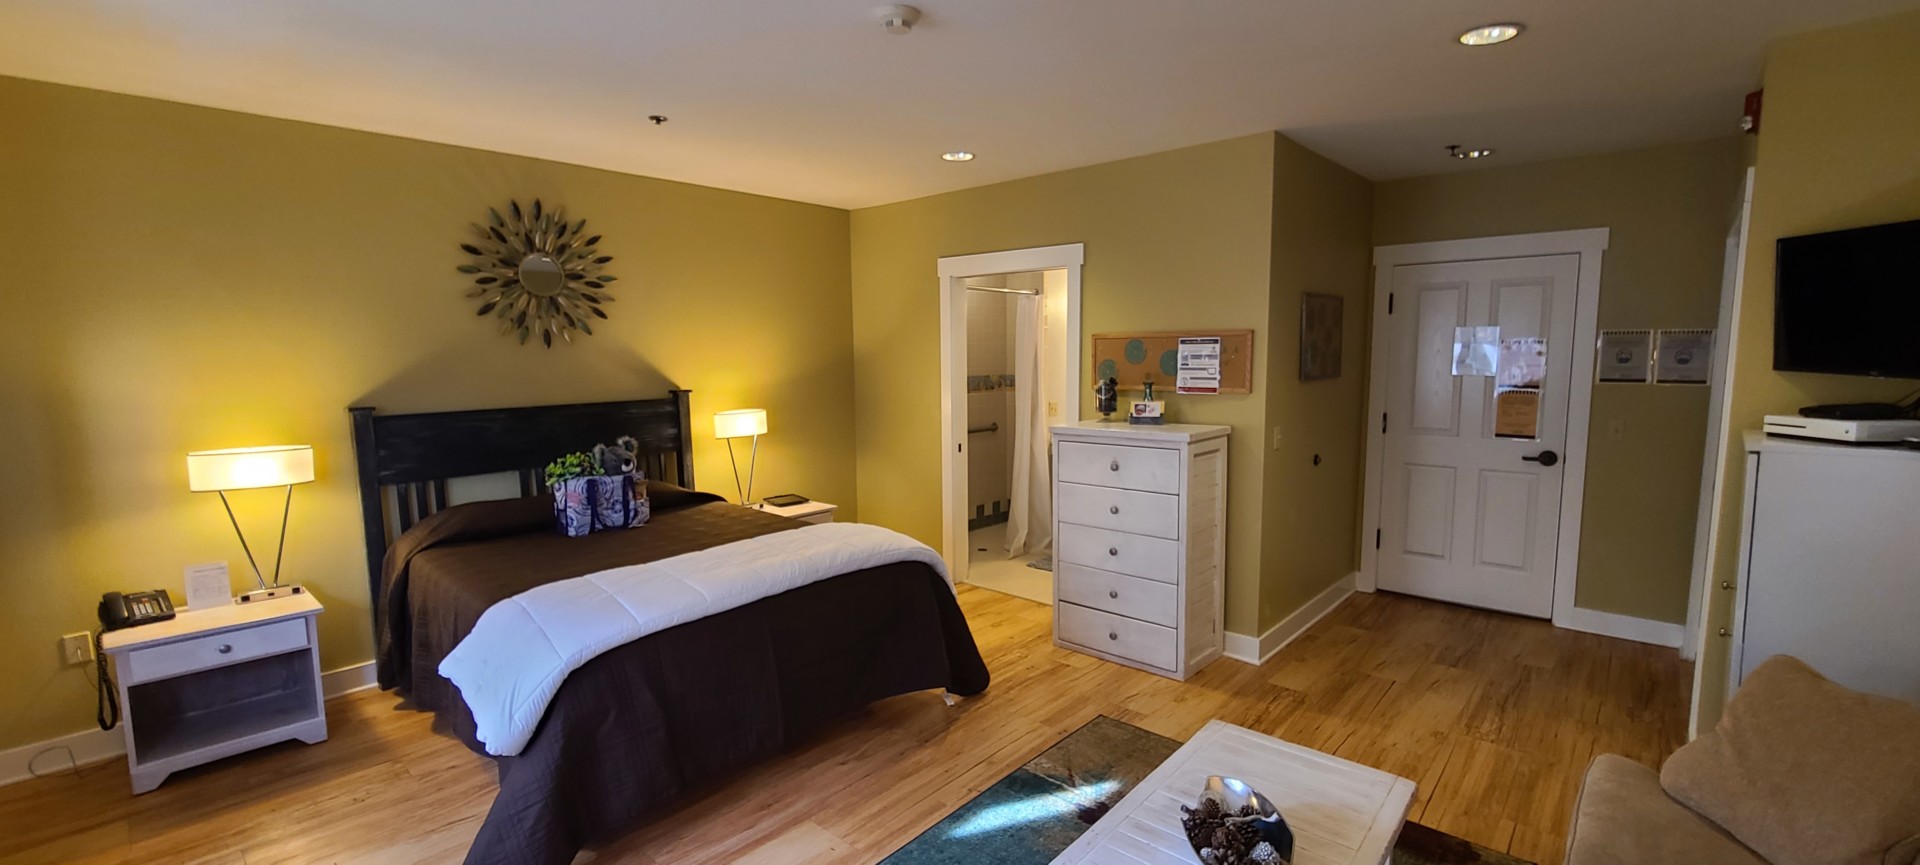 Image of the inside of the Bend House bedroom